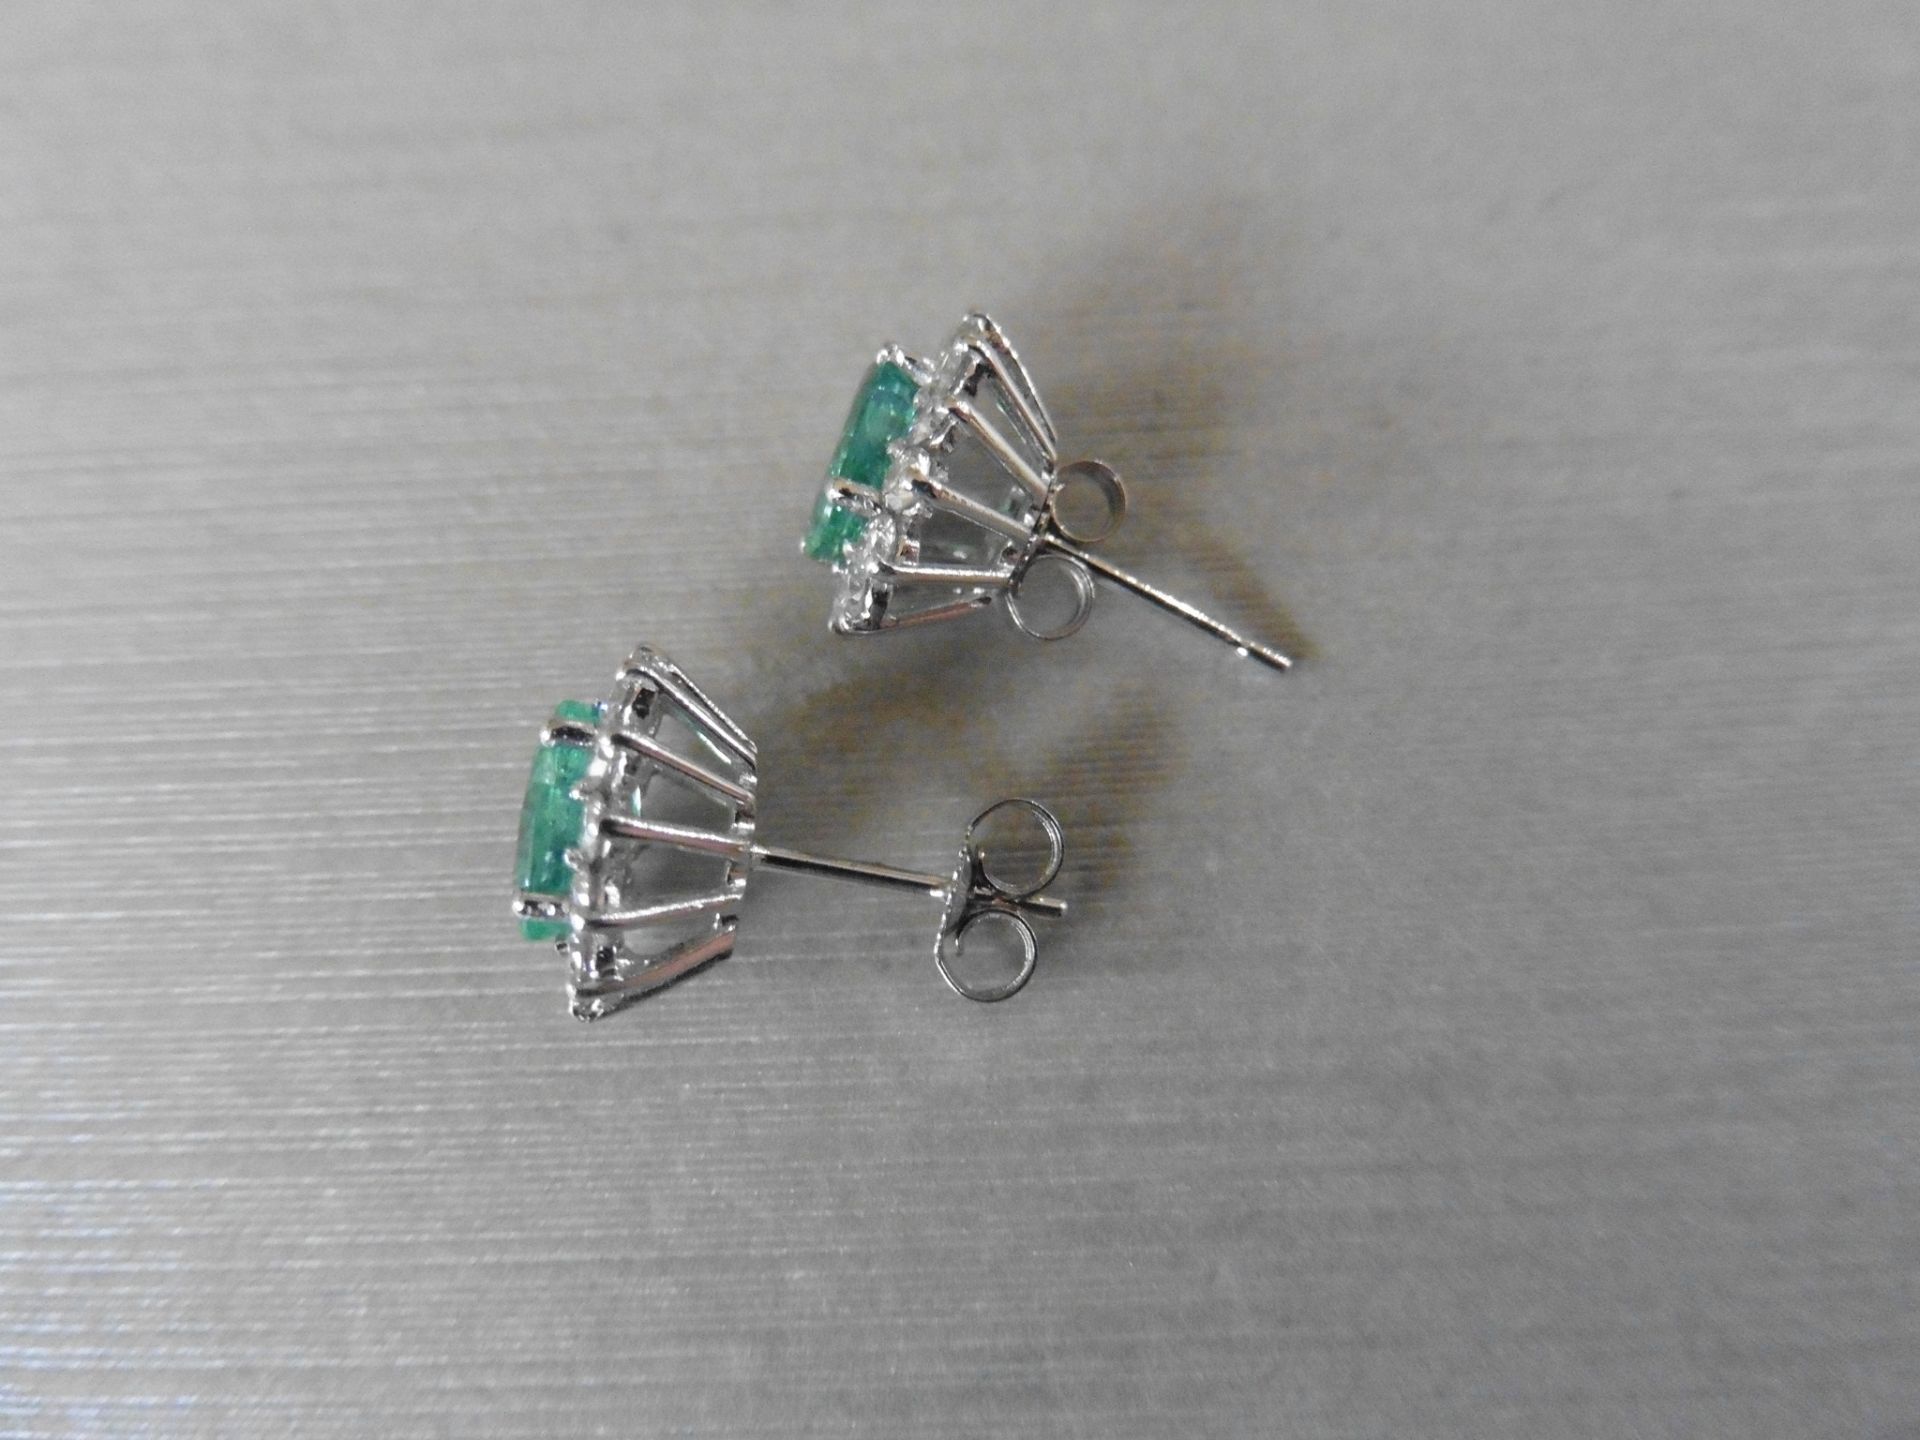 1.60ct emerald and Diamond cluster style stud earrings. Each emerald ( treated ) measures 7mm x